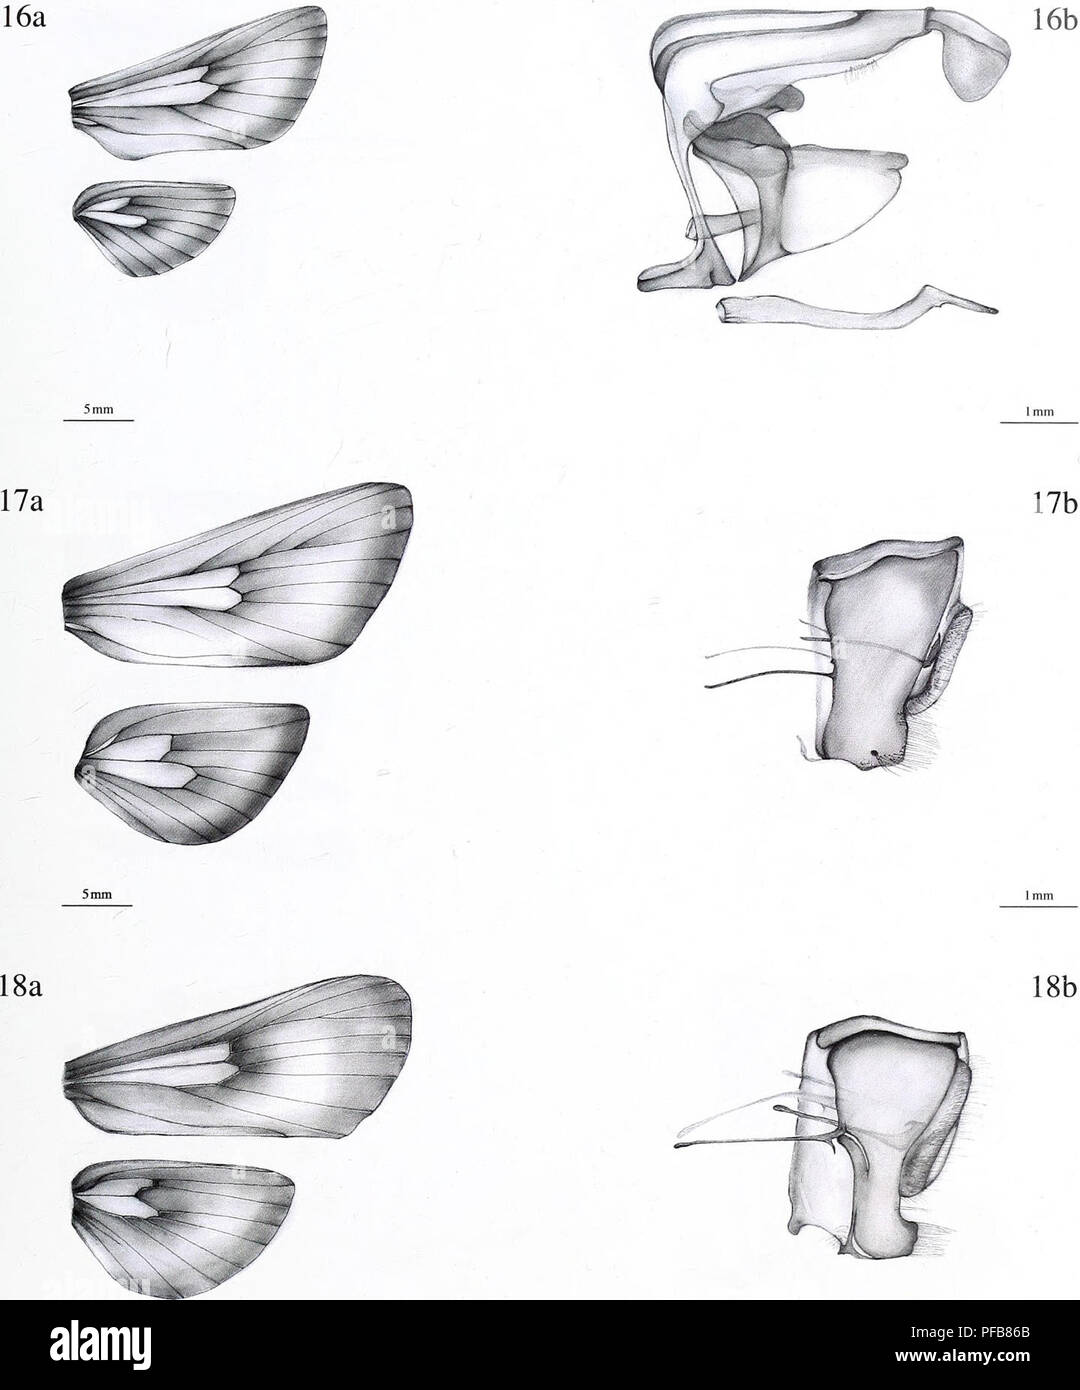 . The description of a new genus and twenty-three new species of Metarbelidae (Lepidoptera : Cossoidea) from the lowland tropical rain forests of the Guineo-Congolian Region with notes on habitats and biogeography / Ingo Lehmannn. 53. 5 mm Imm Figure 16a. Wing venation of: Haberlandia ueleensis spec, nov., male, holotype. 17a. Haberlandia clenchi spec, nov., female, holotype. 18a. Haberlandia hintzi (Griinberg 1911) comb, nov., female, holotype. Figure 16b. Genitalia of: Haberlandia ueleensis spec, nov., male, holotype. 17b. Haberlandia clenchi spec, nov., female, holotype. 18b. Haberlandia hi Stock Photo